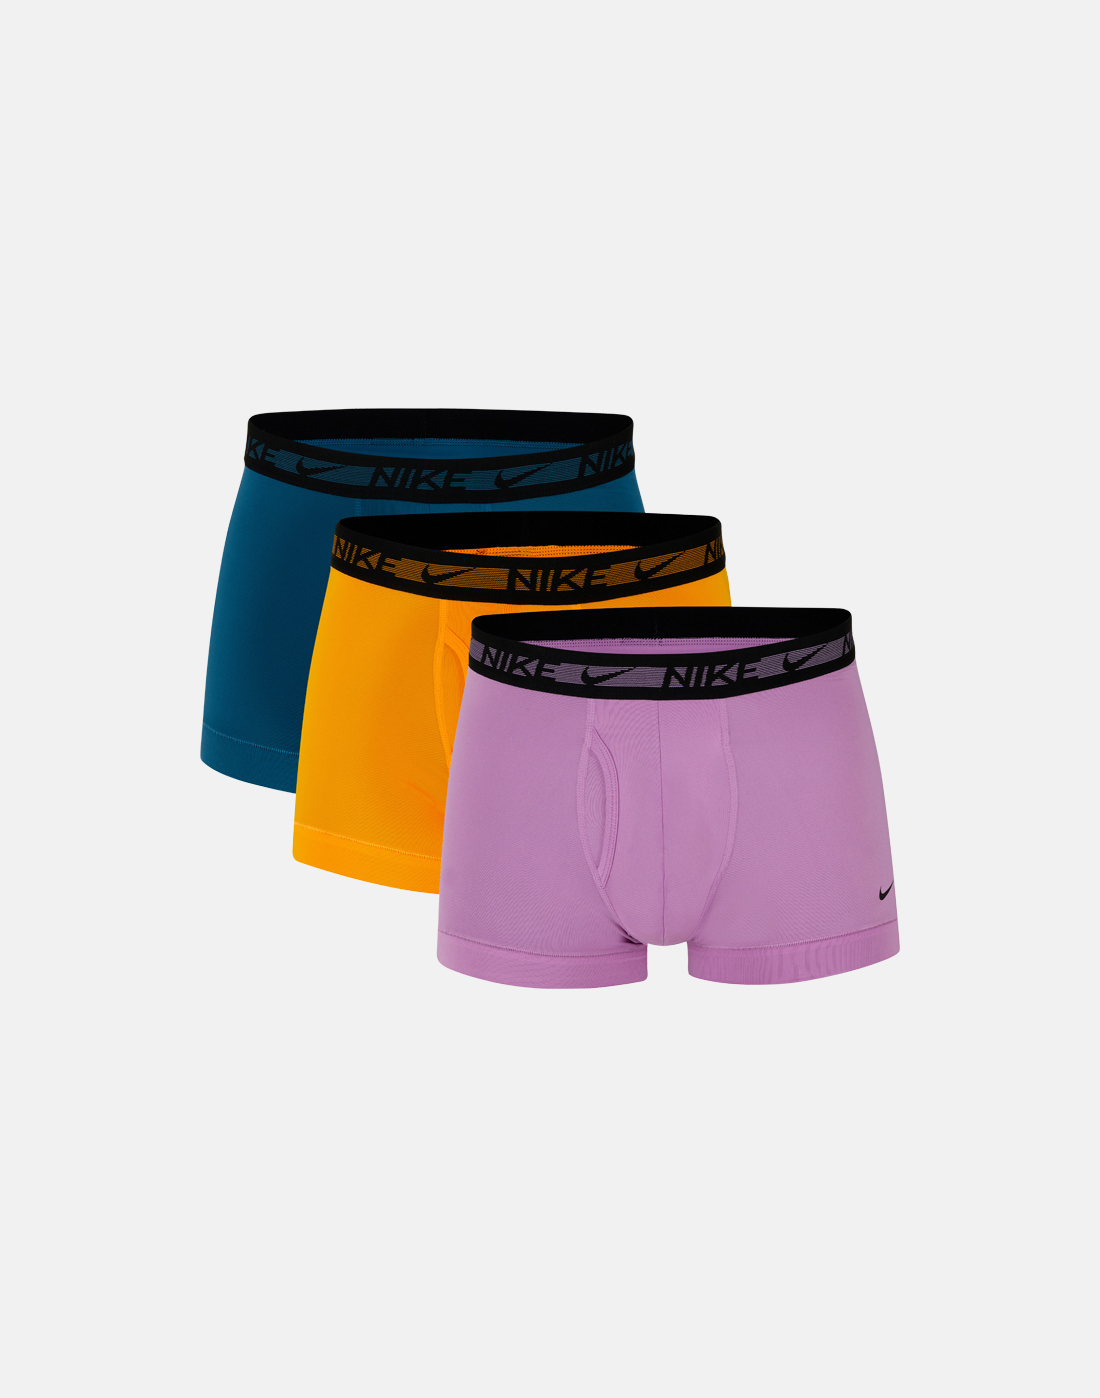 Nike Mens 3 Pack Trunk Boxers - Assorted | Life Style Sports IE